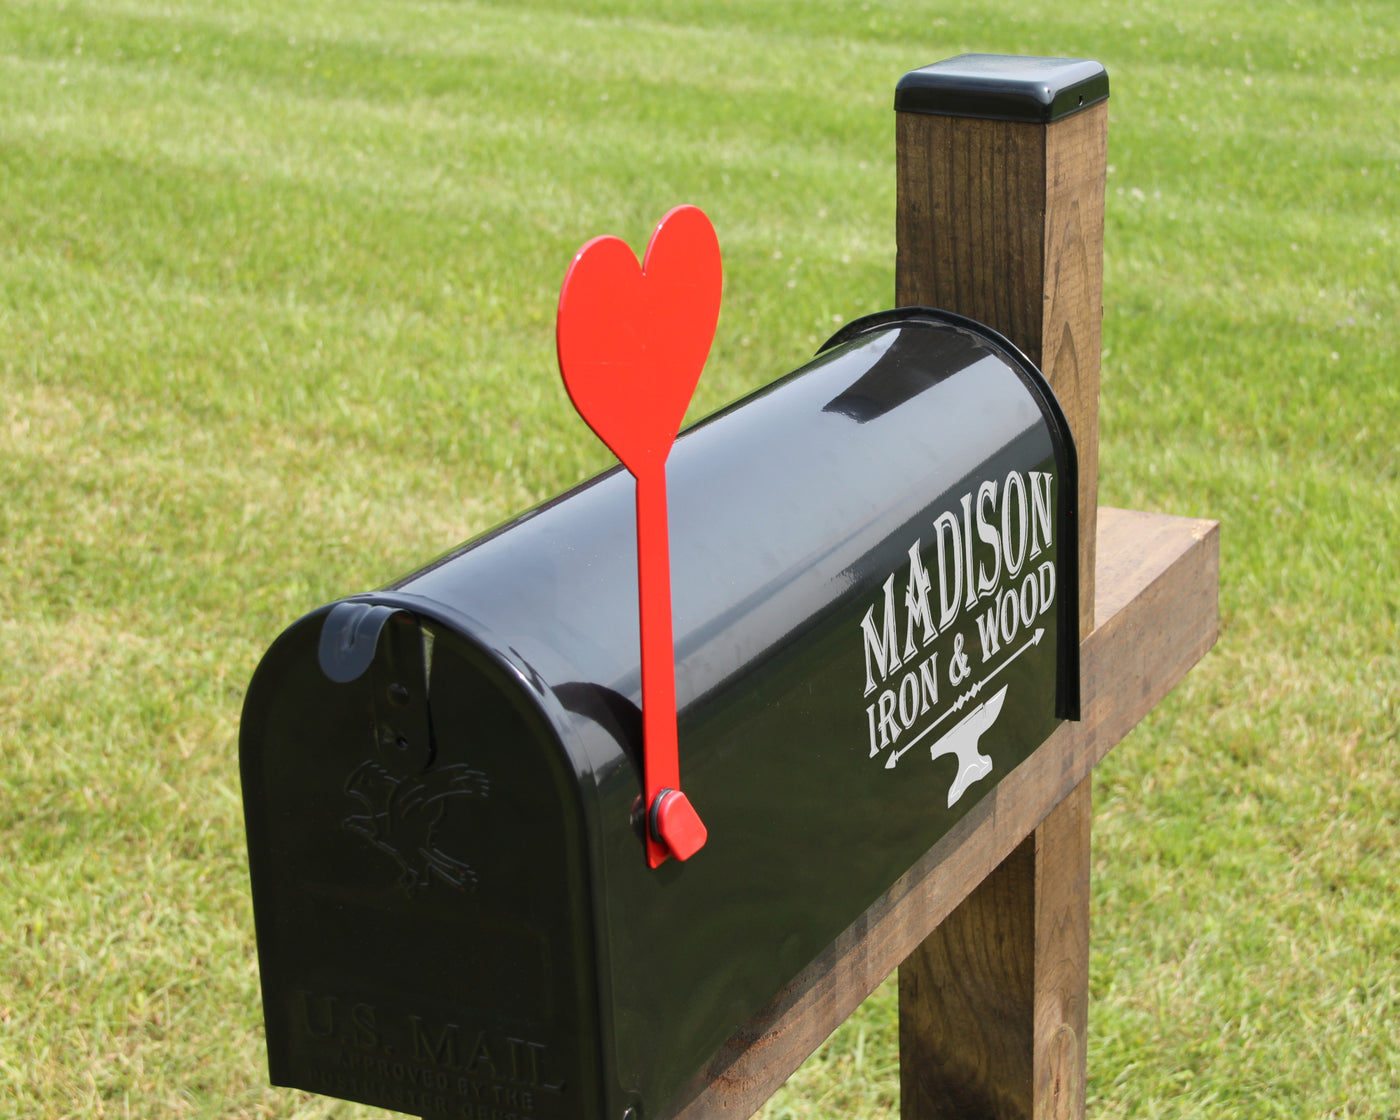 Heart Mailbox Flag - Madison Iron and Wood - Mailbox Post Decor - metal outdoor decor - Steel deocrations - american made products - veteran owned business products - fencing decorations - fencing supplies - custom wall decorations - personalized wall signs - steel - decorative post caps - steel post caps - metal post caps - brackets - structural brackets - home improvement - easter - easter decorations - easter gift - easter yard decor